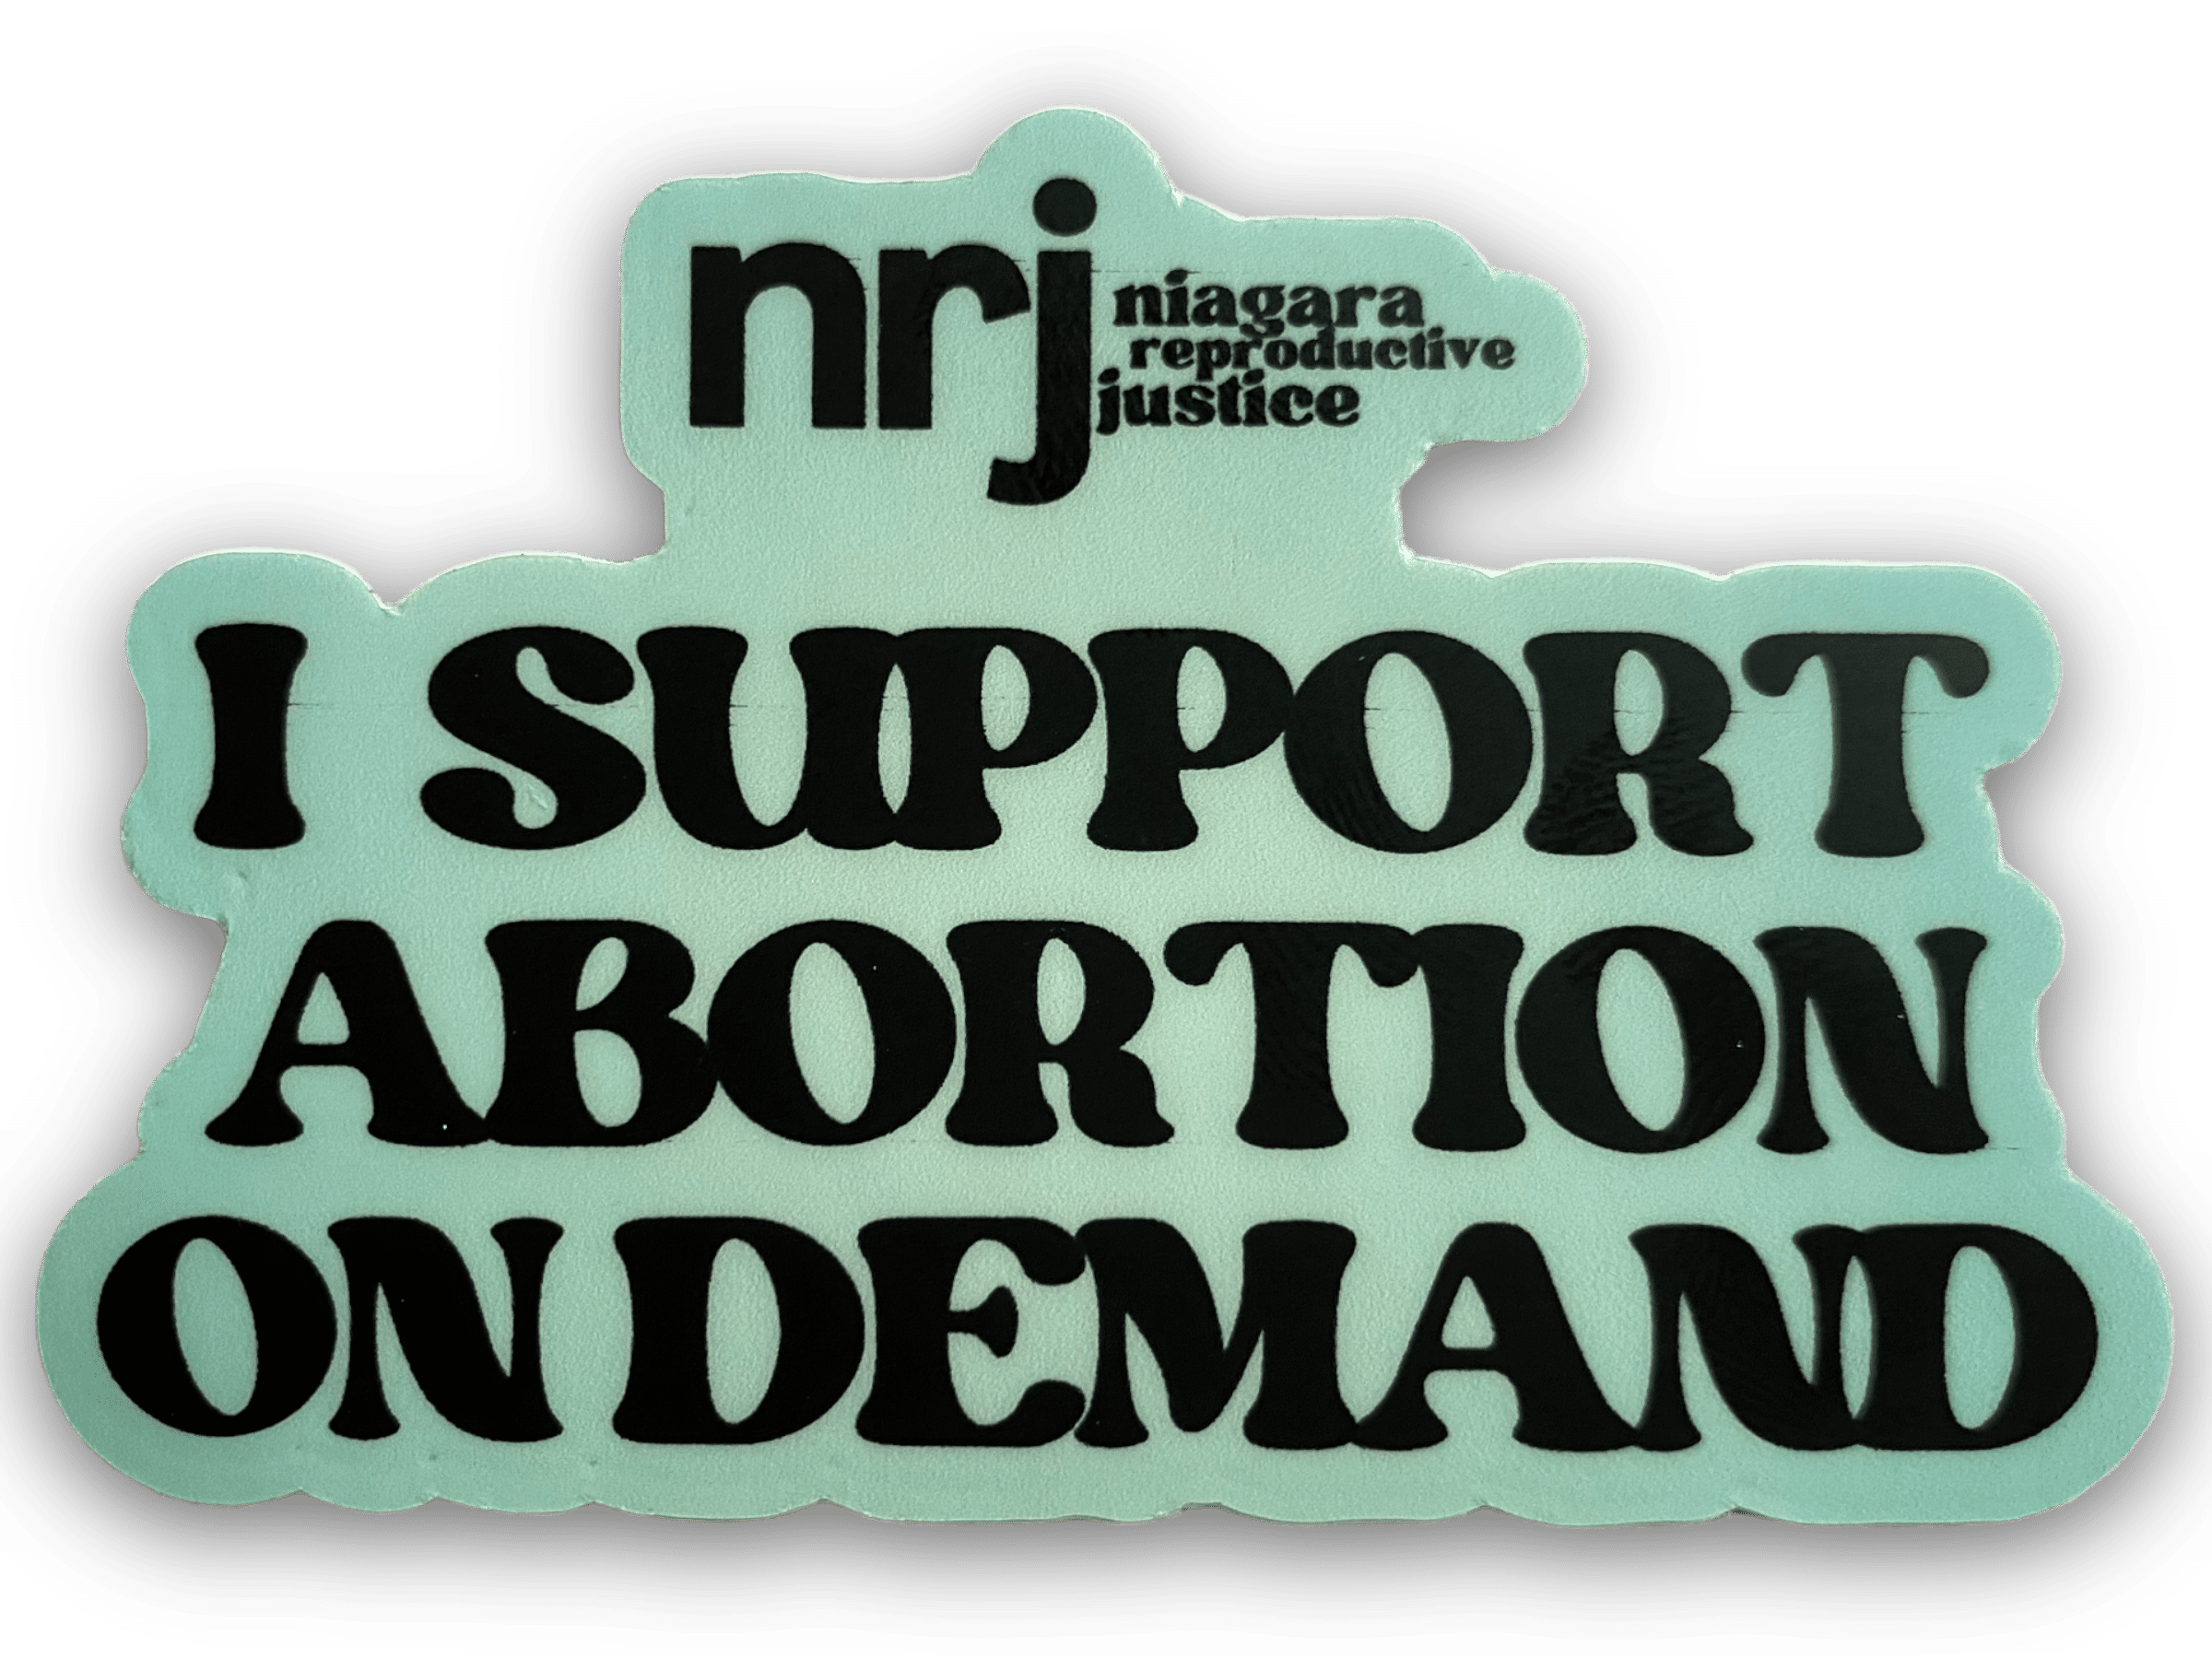 A sticker that reads "I support abortion on demand"